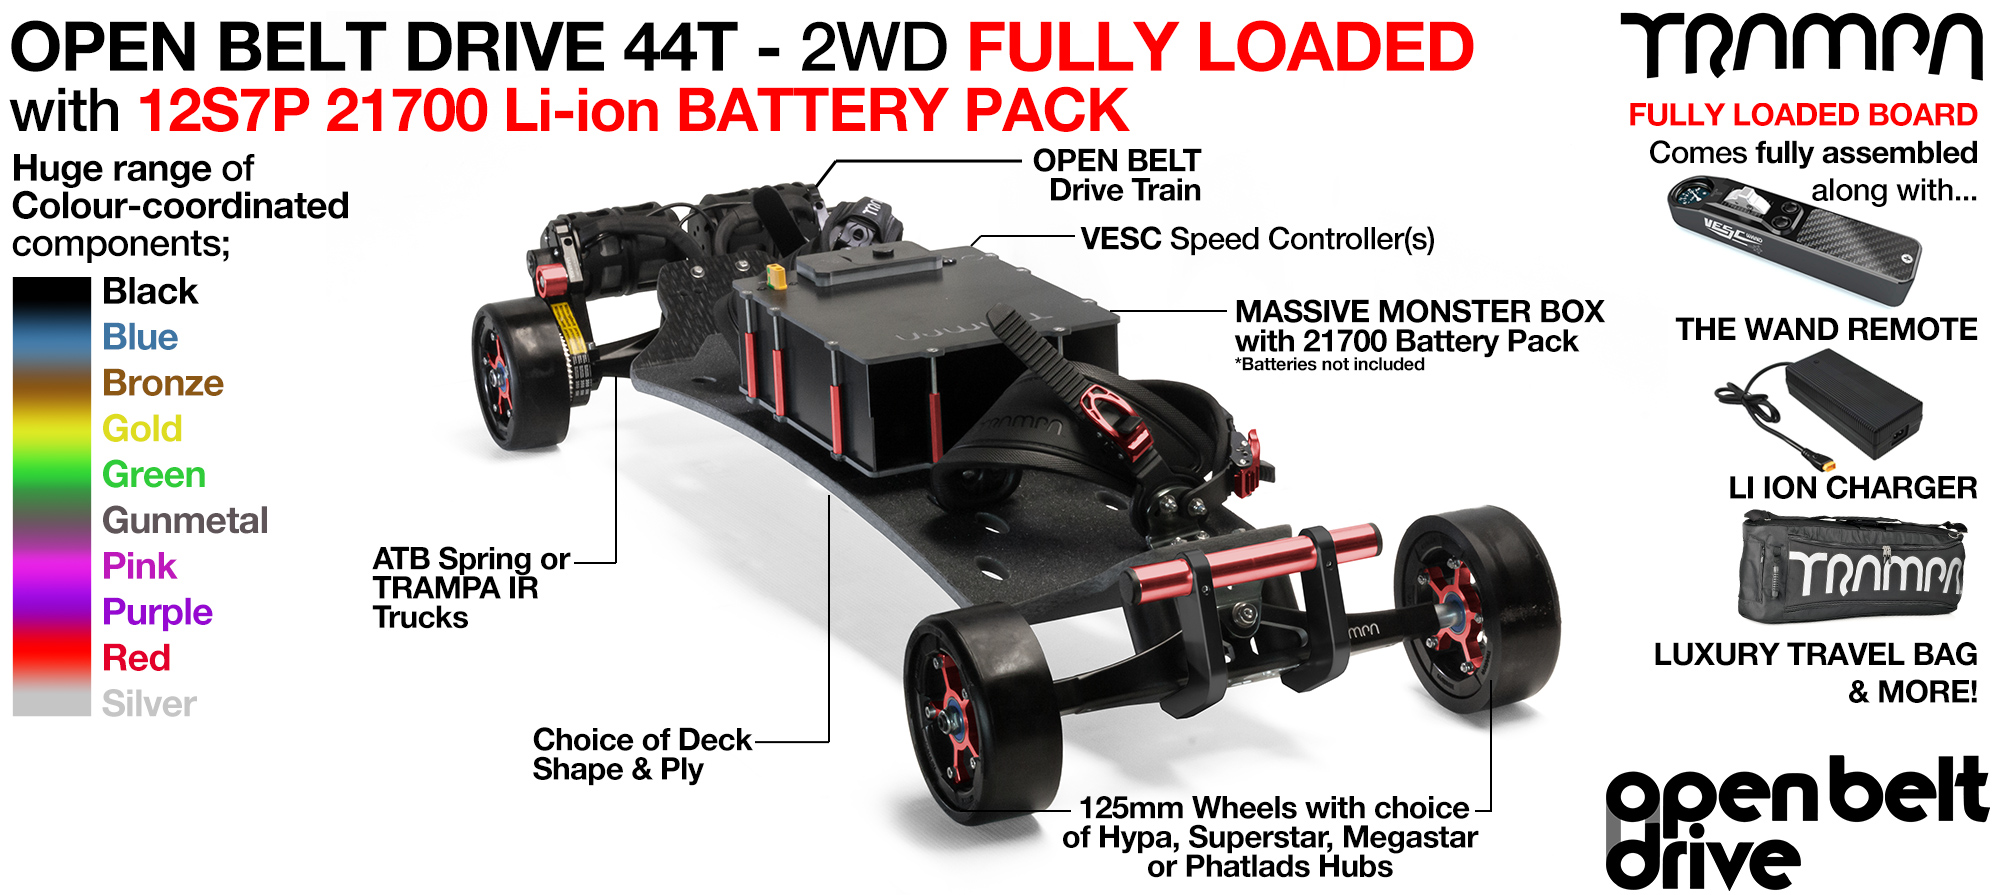 2WD 66T Open Belt Drive TRAMPA Electric Mountainboard with 125mm GUMMIES Giant Longboard Wheels & 44 Tooth Pulleys - FULLY LOADED 21700 CELL Pack